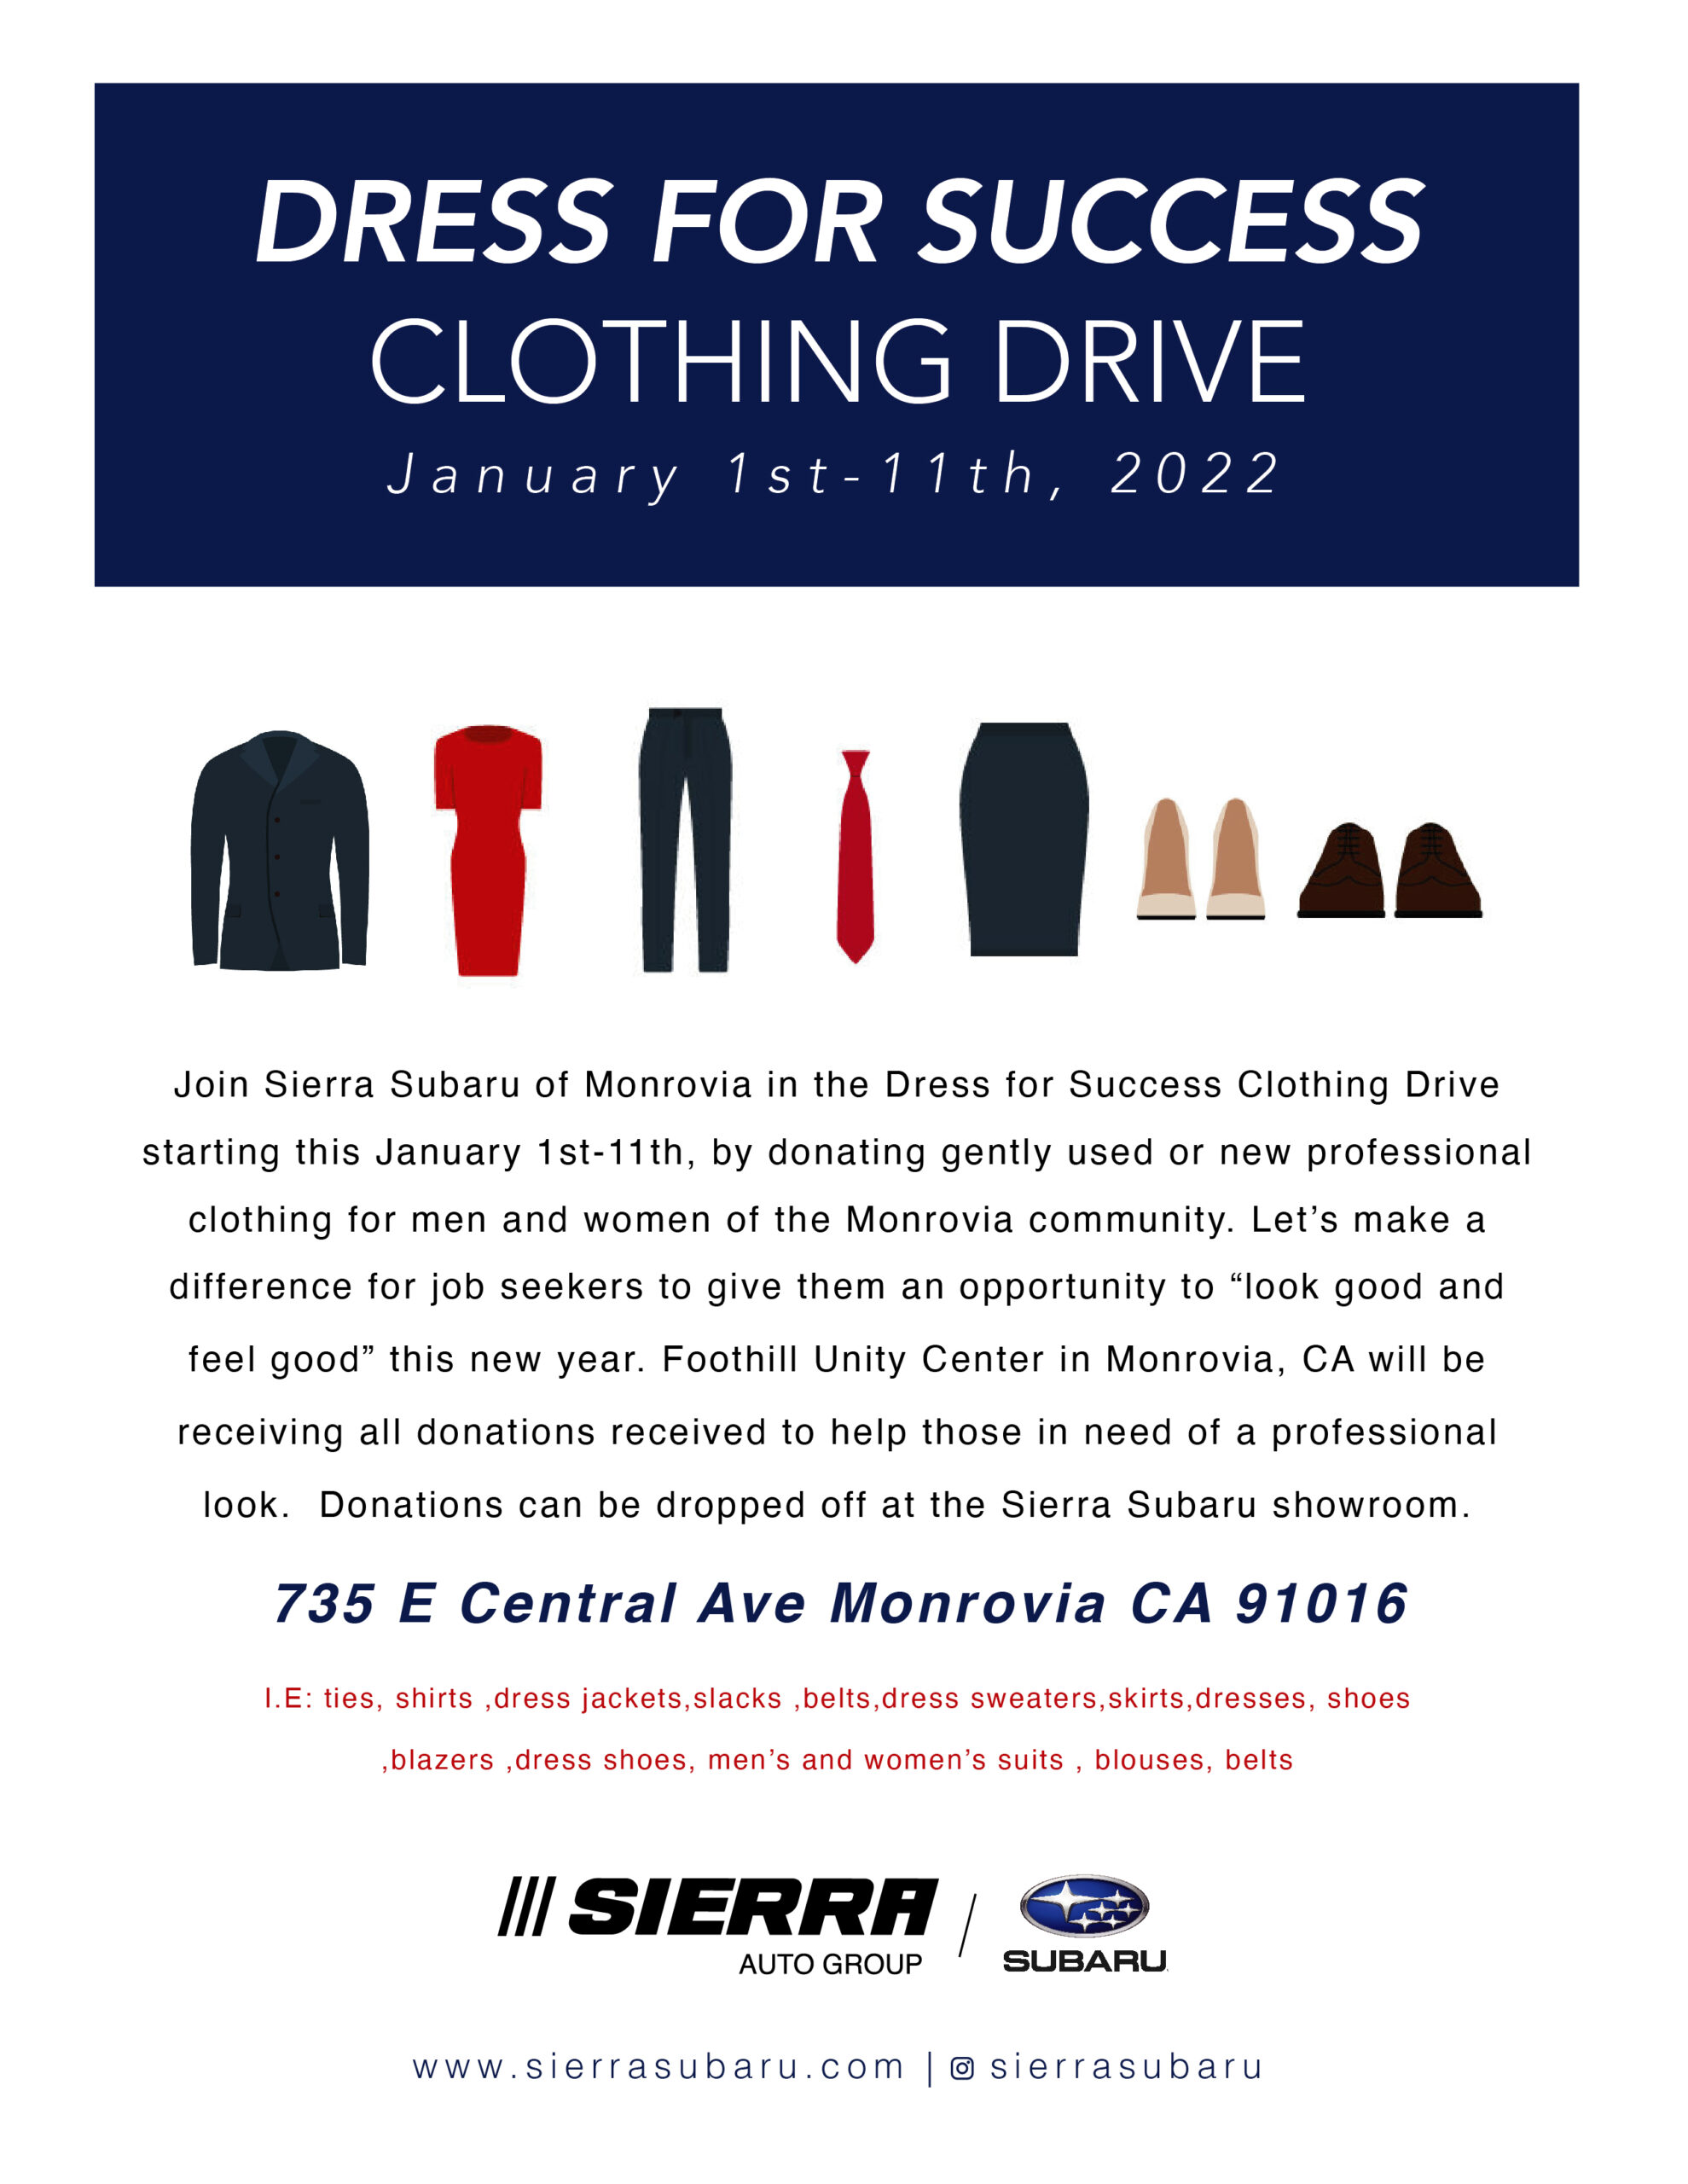 Dress for Success Clothing Drive with Sierra Subaru and Foothill Unity Center